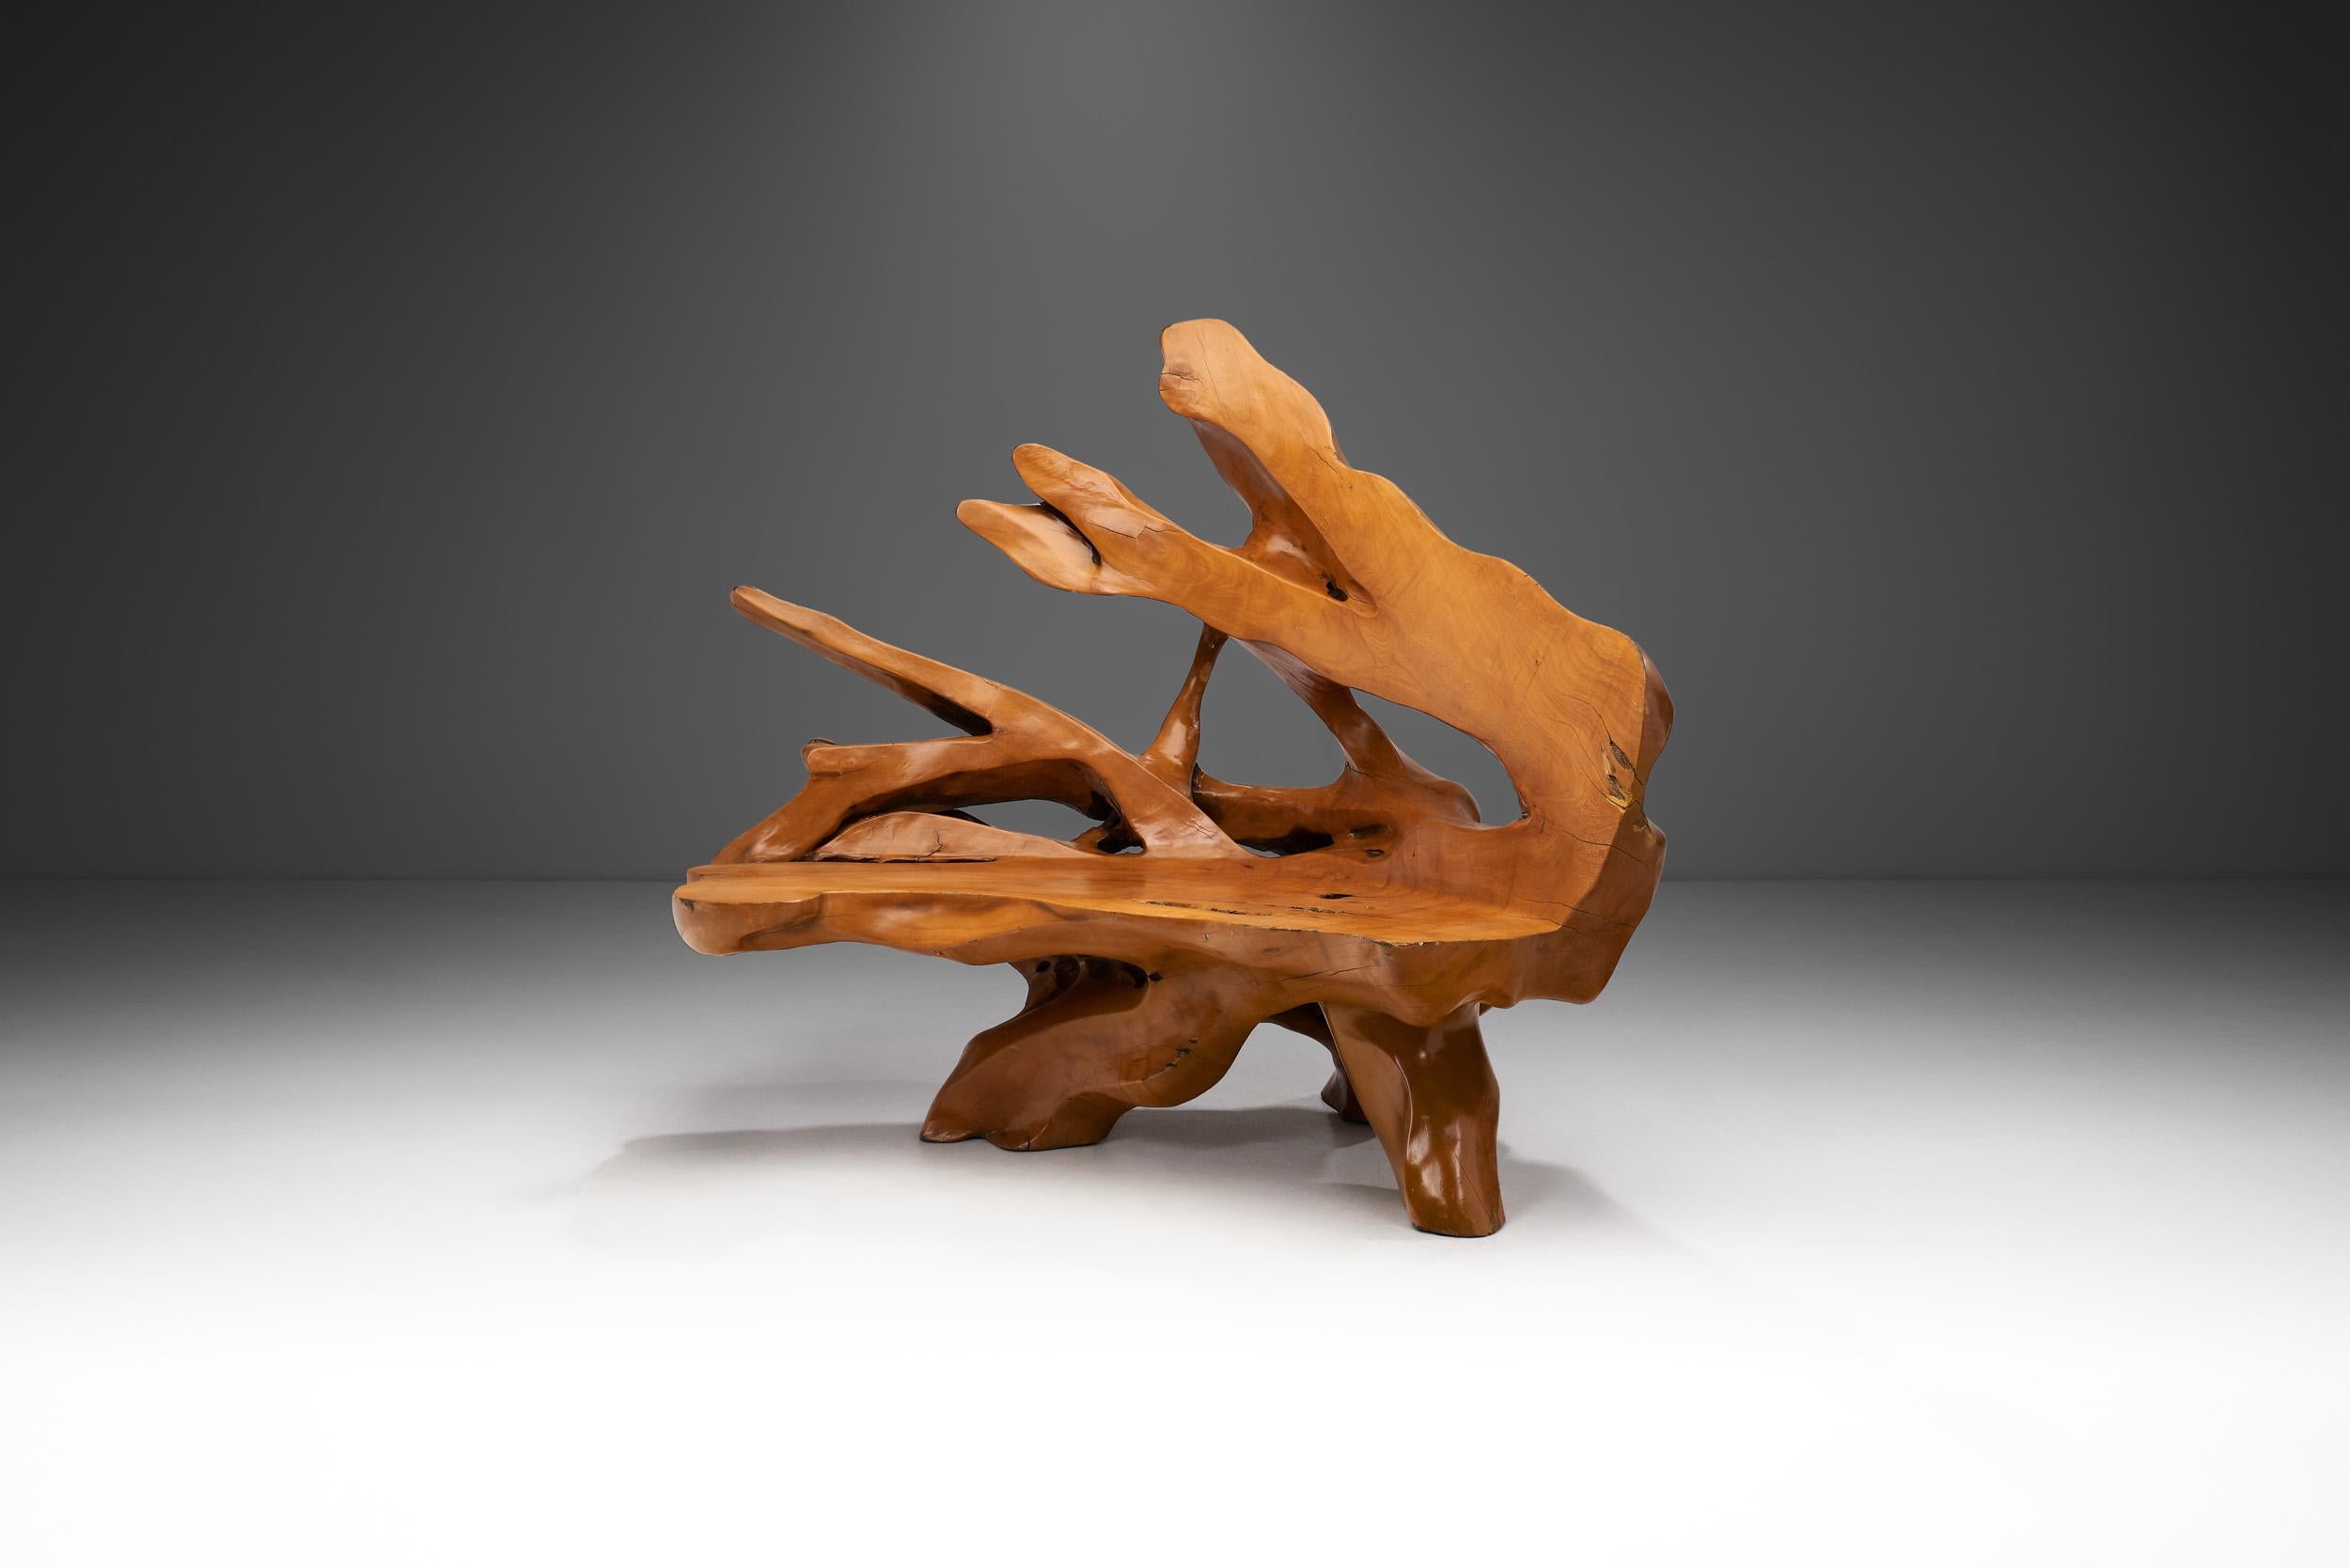 European Handcrafted Teak Root Bench, Europe Late 20th Century For Sale